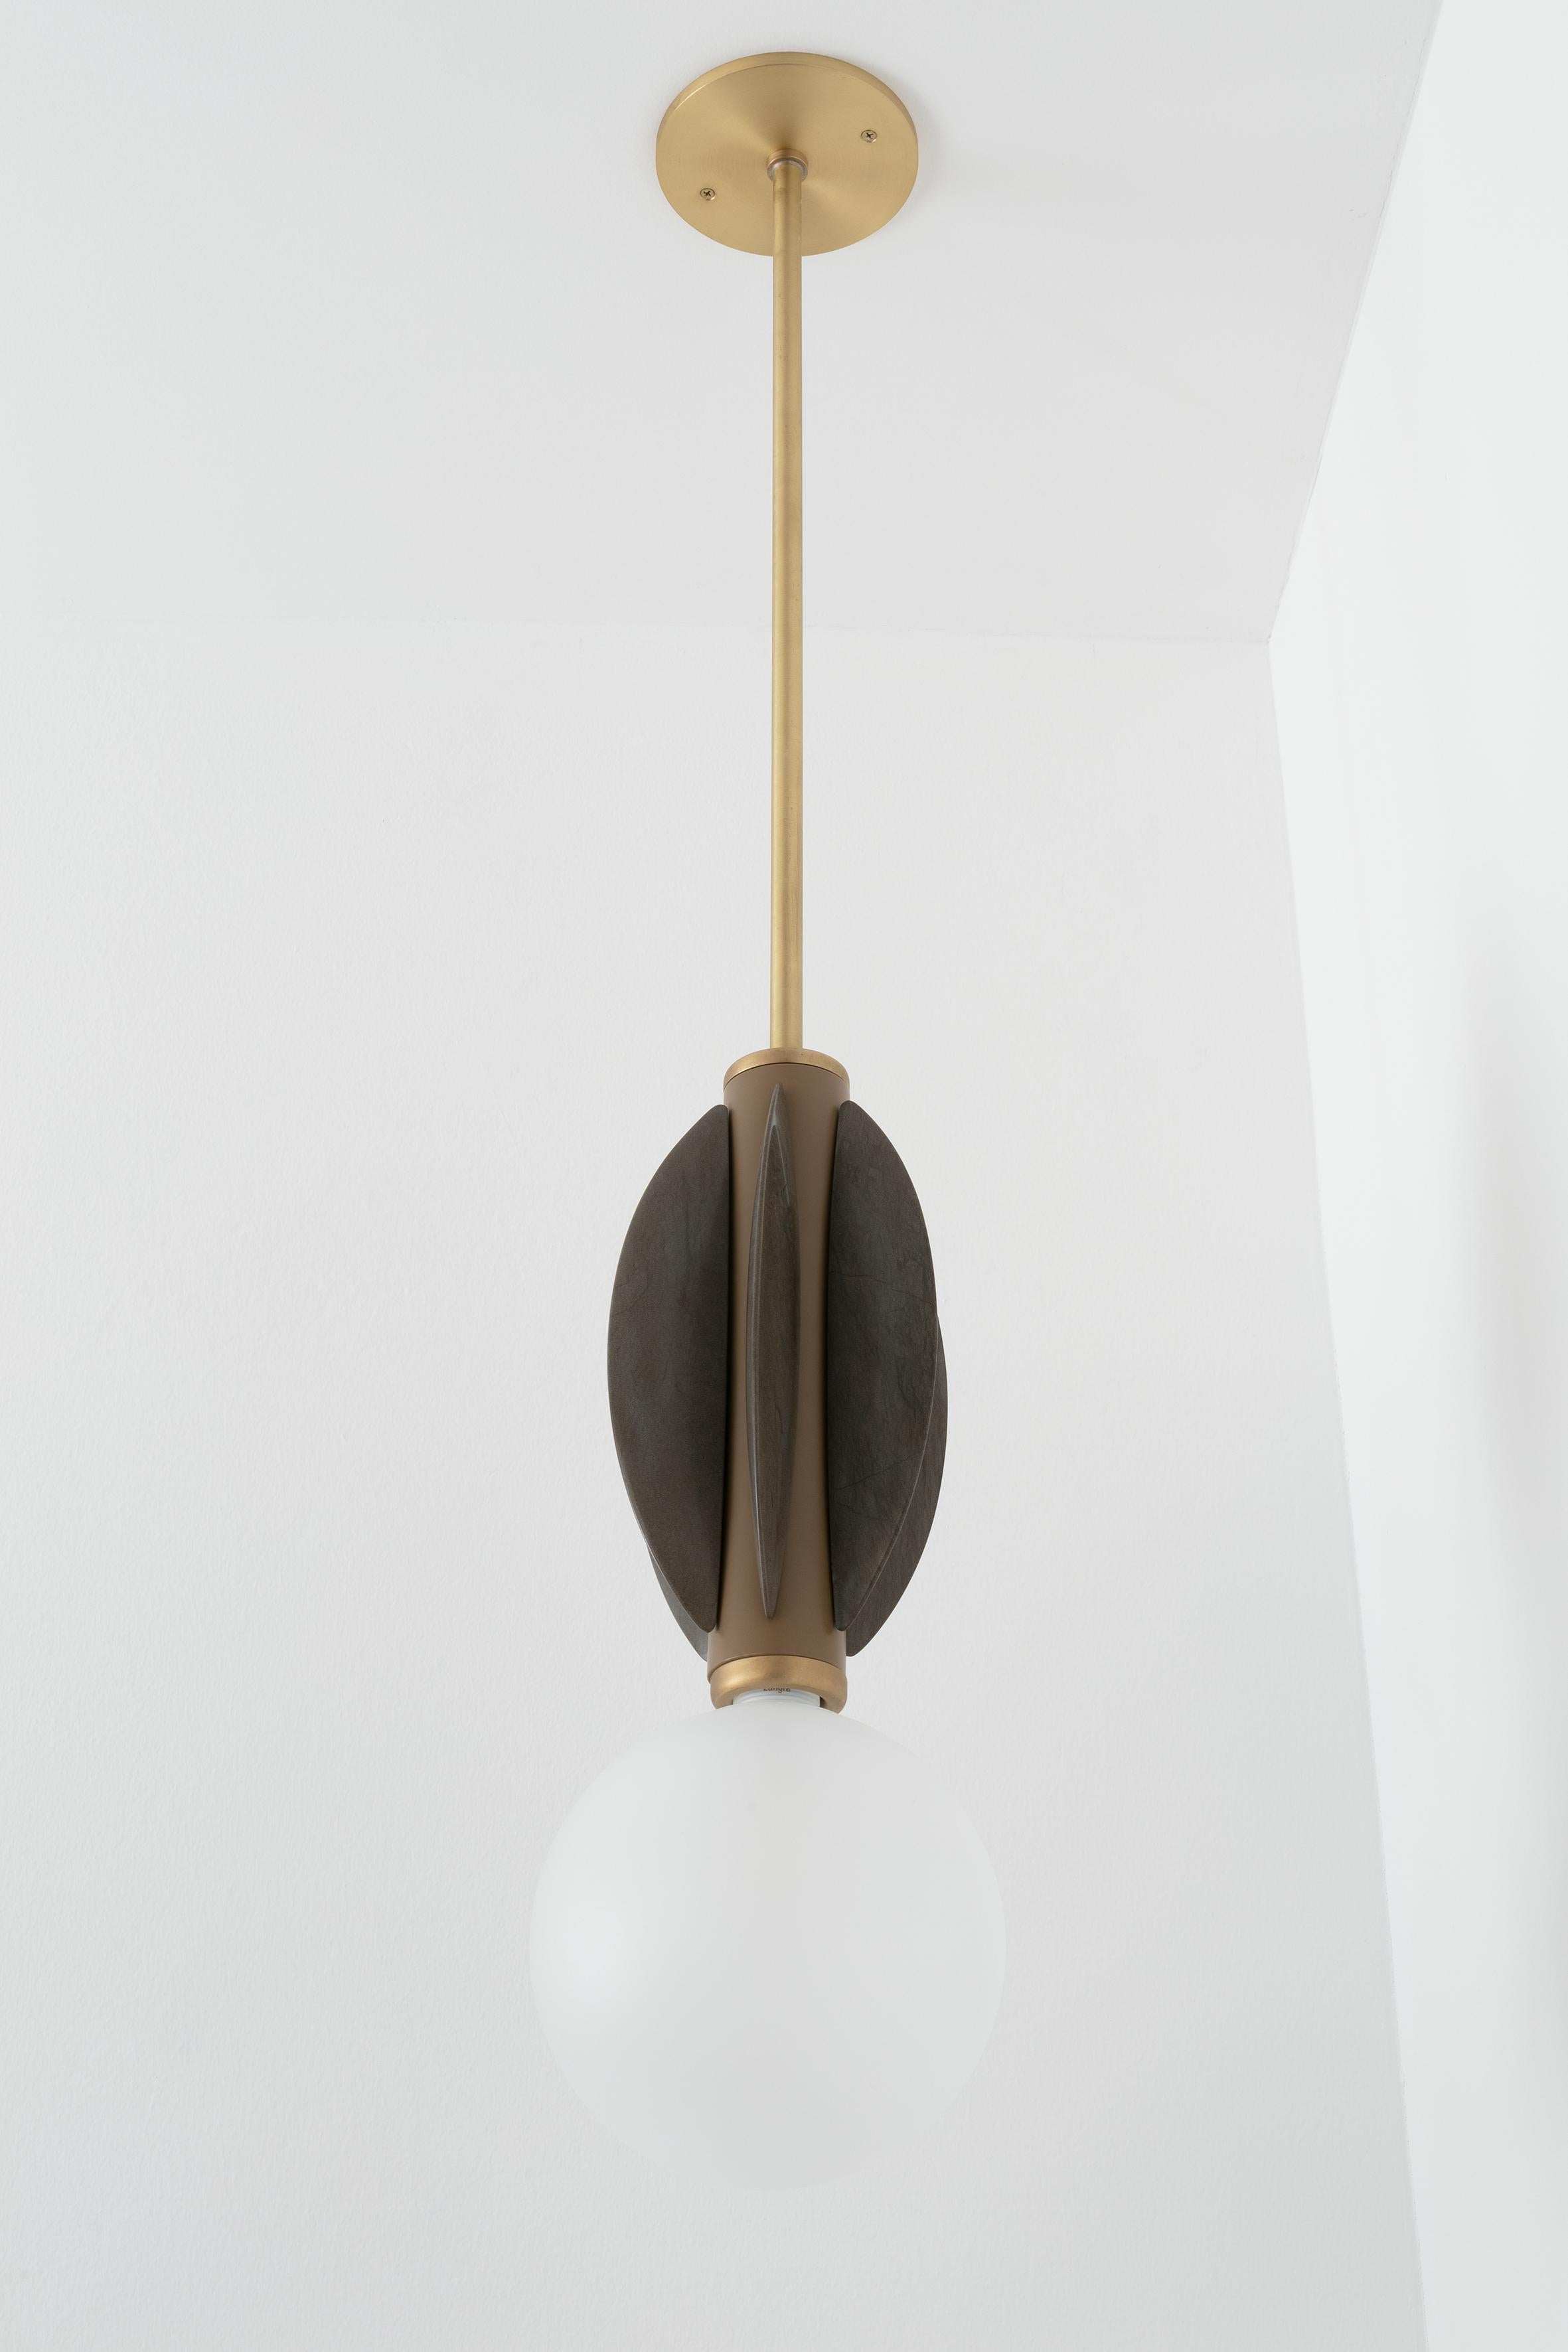 Monarch ceiling mounted - Carla Baz
Dimensions: ø 20 x H 112 cm
Weight: 6 kg
Material: Painted metal, Brass, Marble

Monarch lighting series has been developed with the IDEA of opulence and fine details all the while keeping with our intention